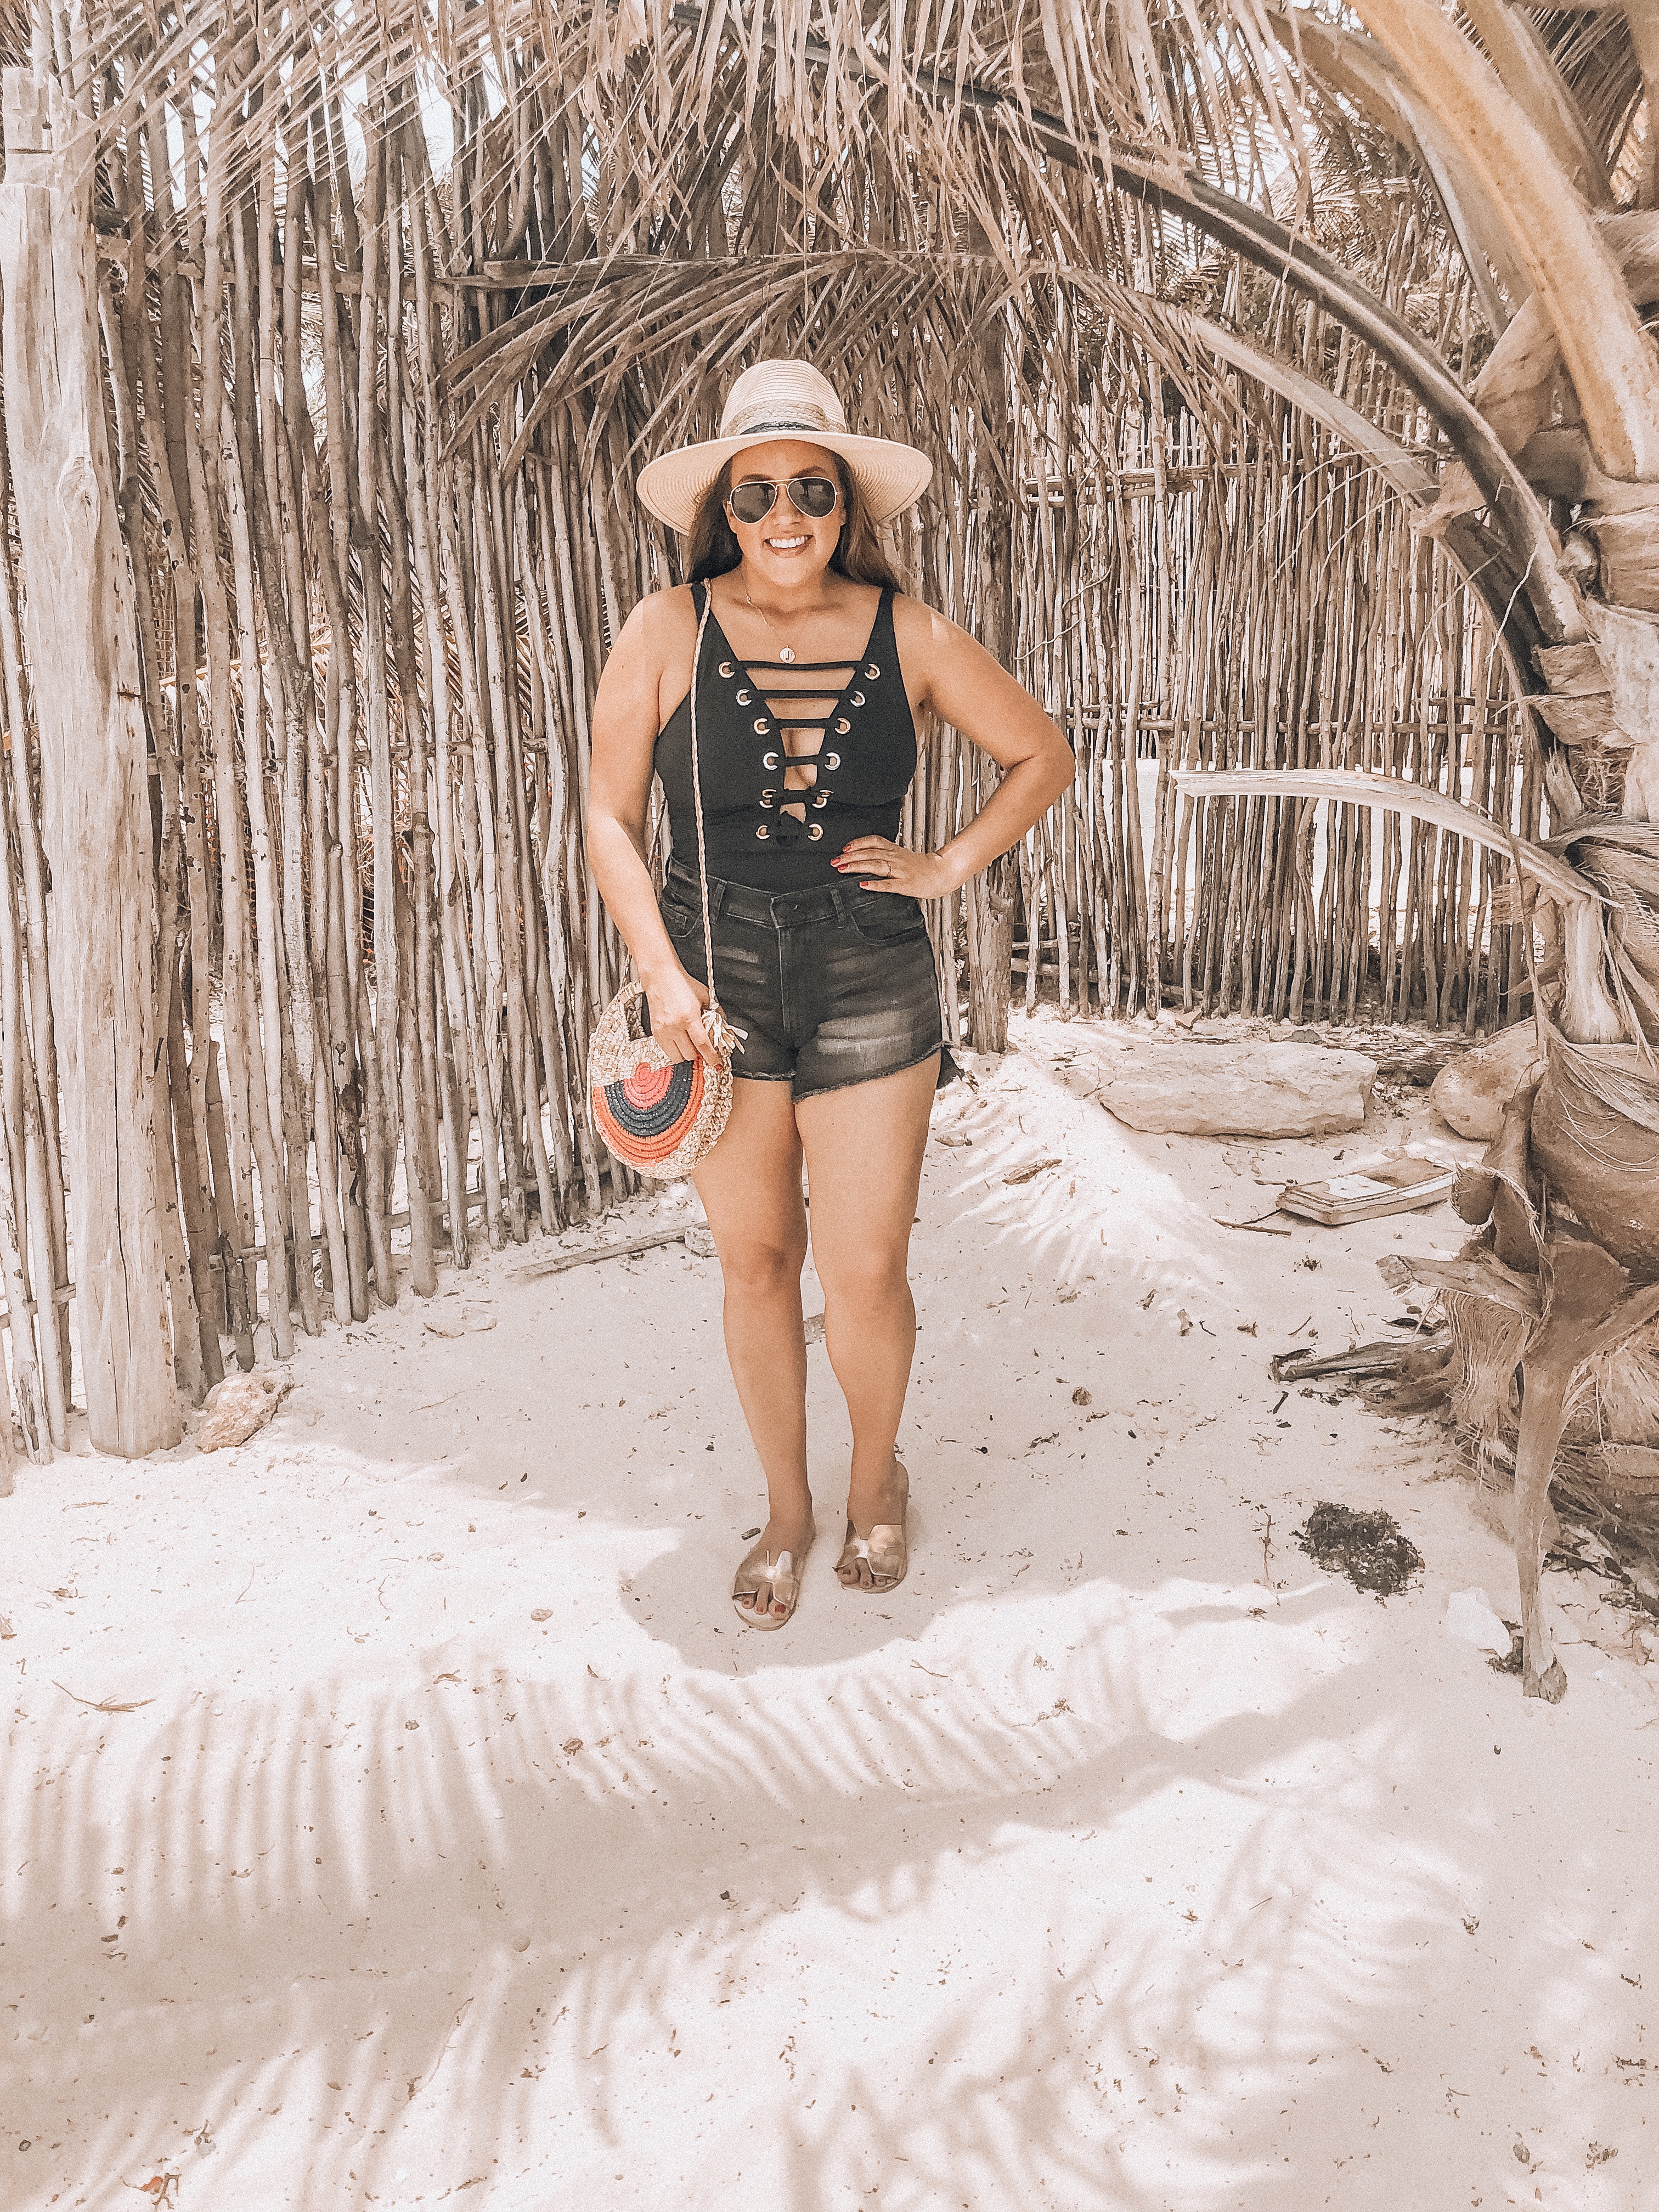 Ashley Zeal from Two Peas in a Prada shares her Tulum Travel Guide, including where to stay, eat, what to do, what to pack, and travel details.